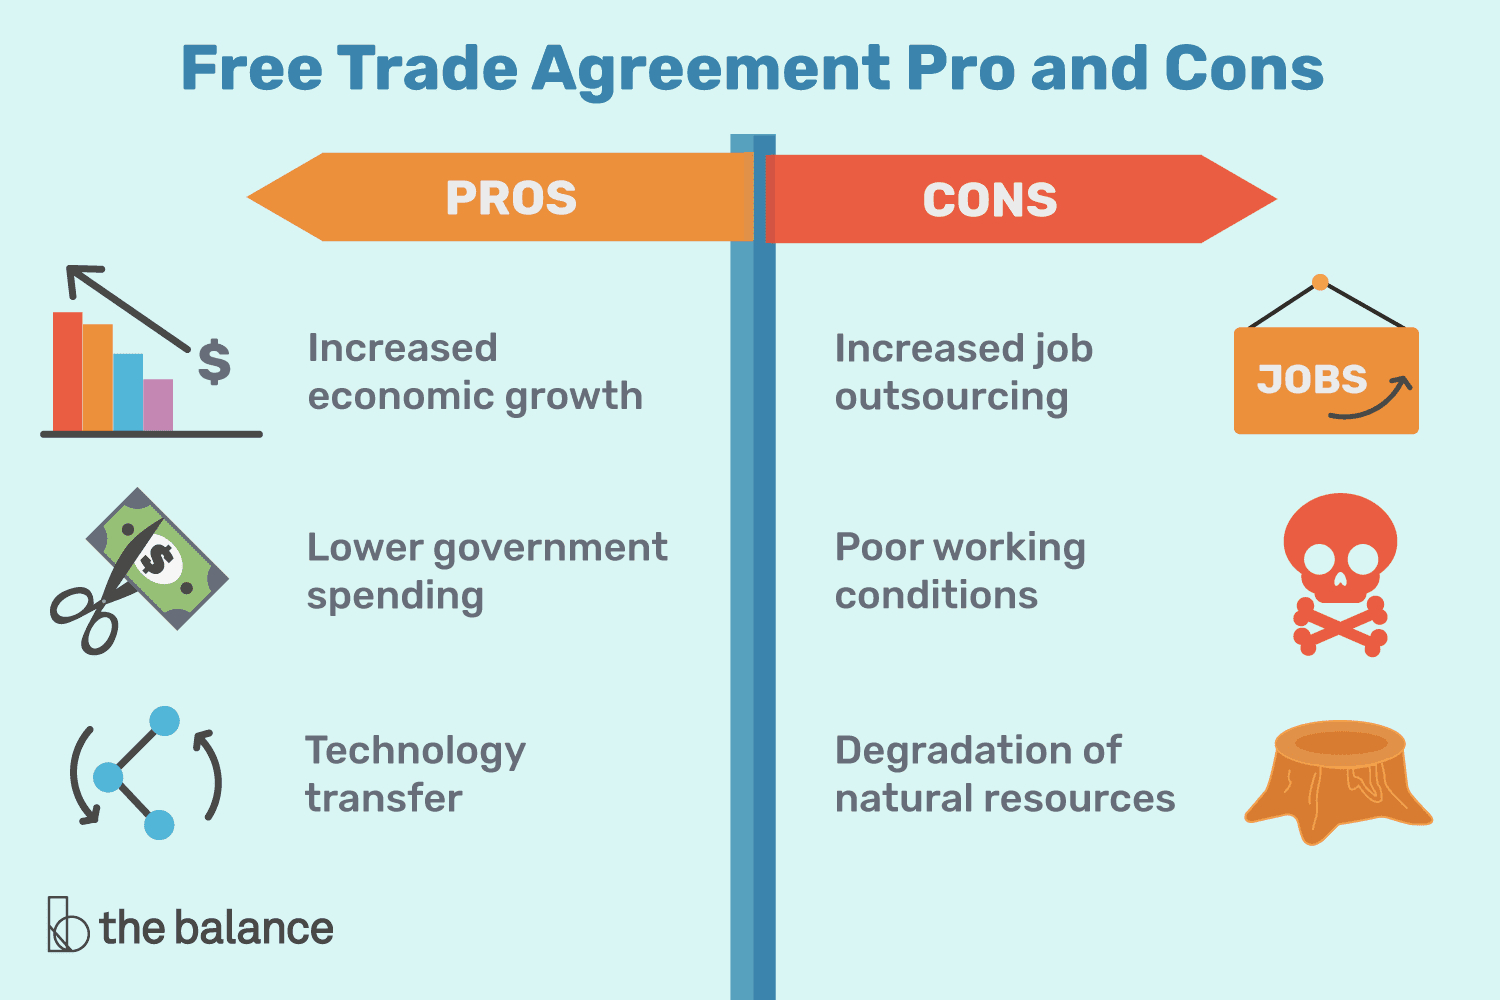 Eu Colombia Free Trade Agreement Free Trade Agreement Pros And Cons